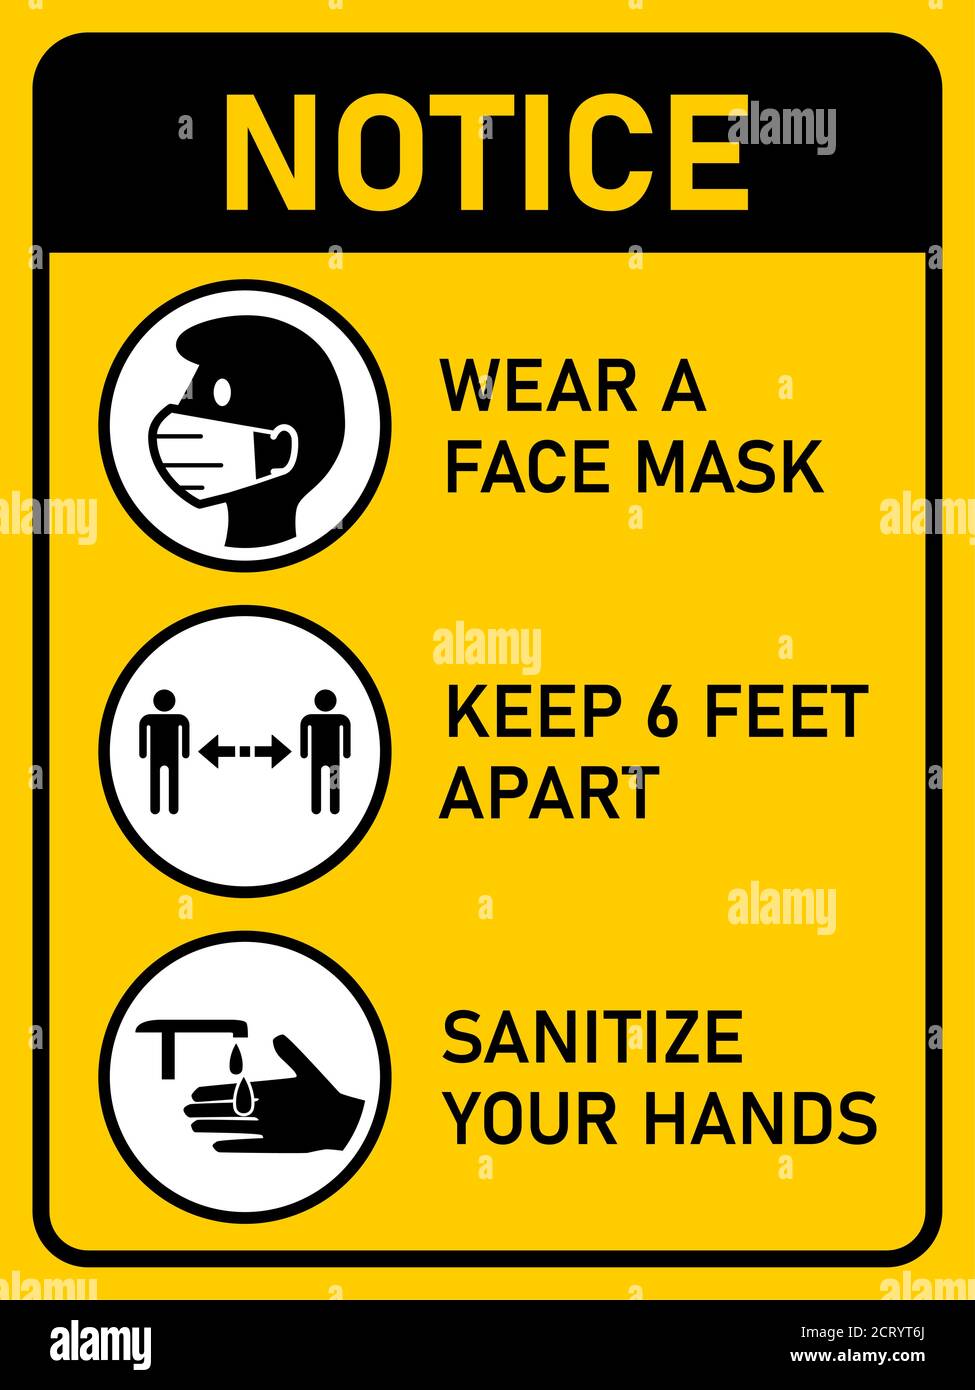 Vertical Instruction Sign against the Spread of Coronavirus, including Wear a Face Mask, Keep 6 Feet Apart and Sanitize Your Hands. Vector Image. Stock Vector